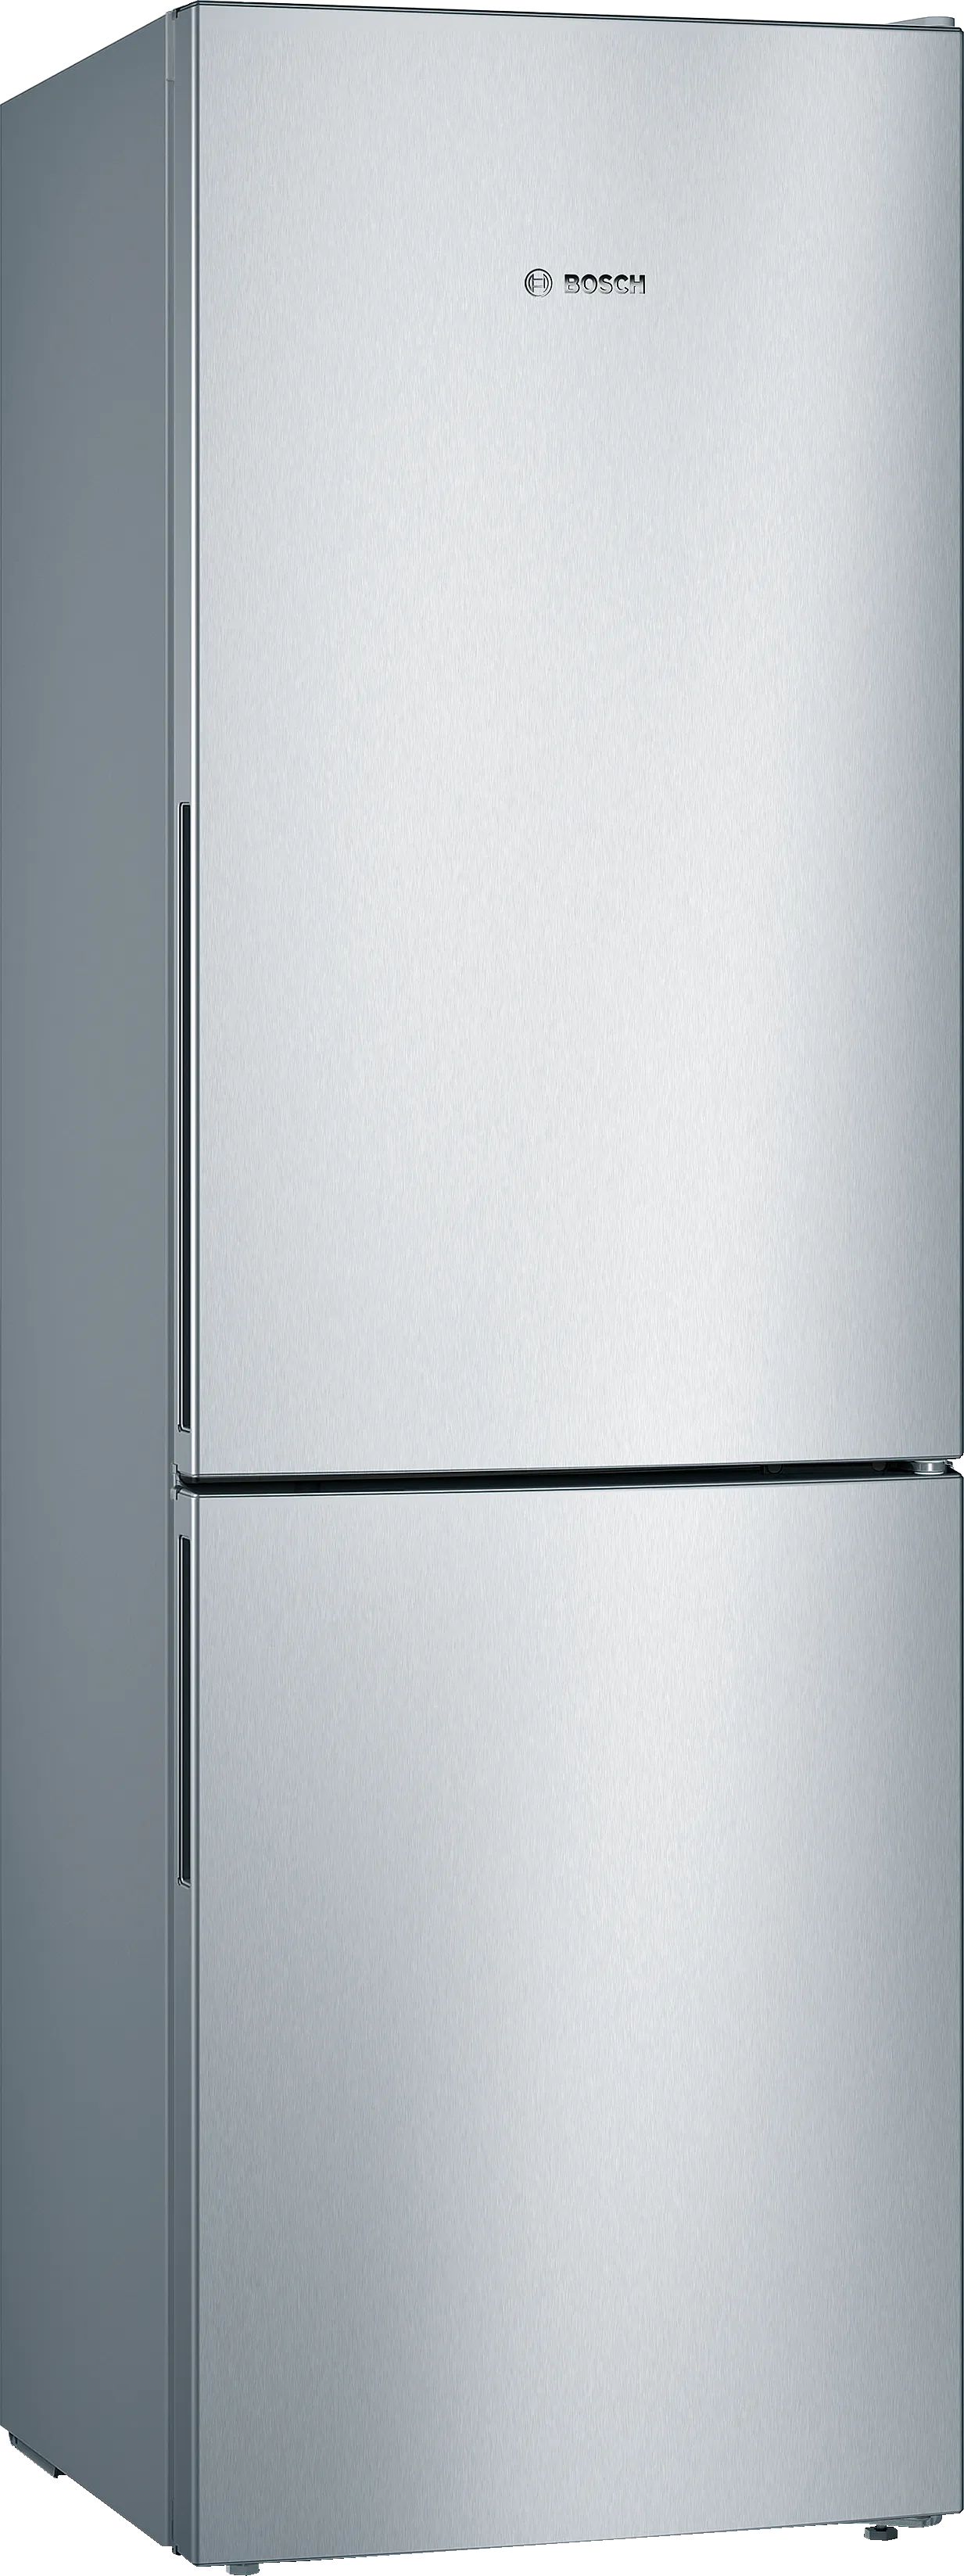 Series 4 free-standing fridge-freezer with freezer at bottom 186 x 60 cm Stainless steel look 